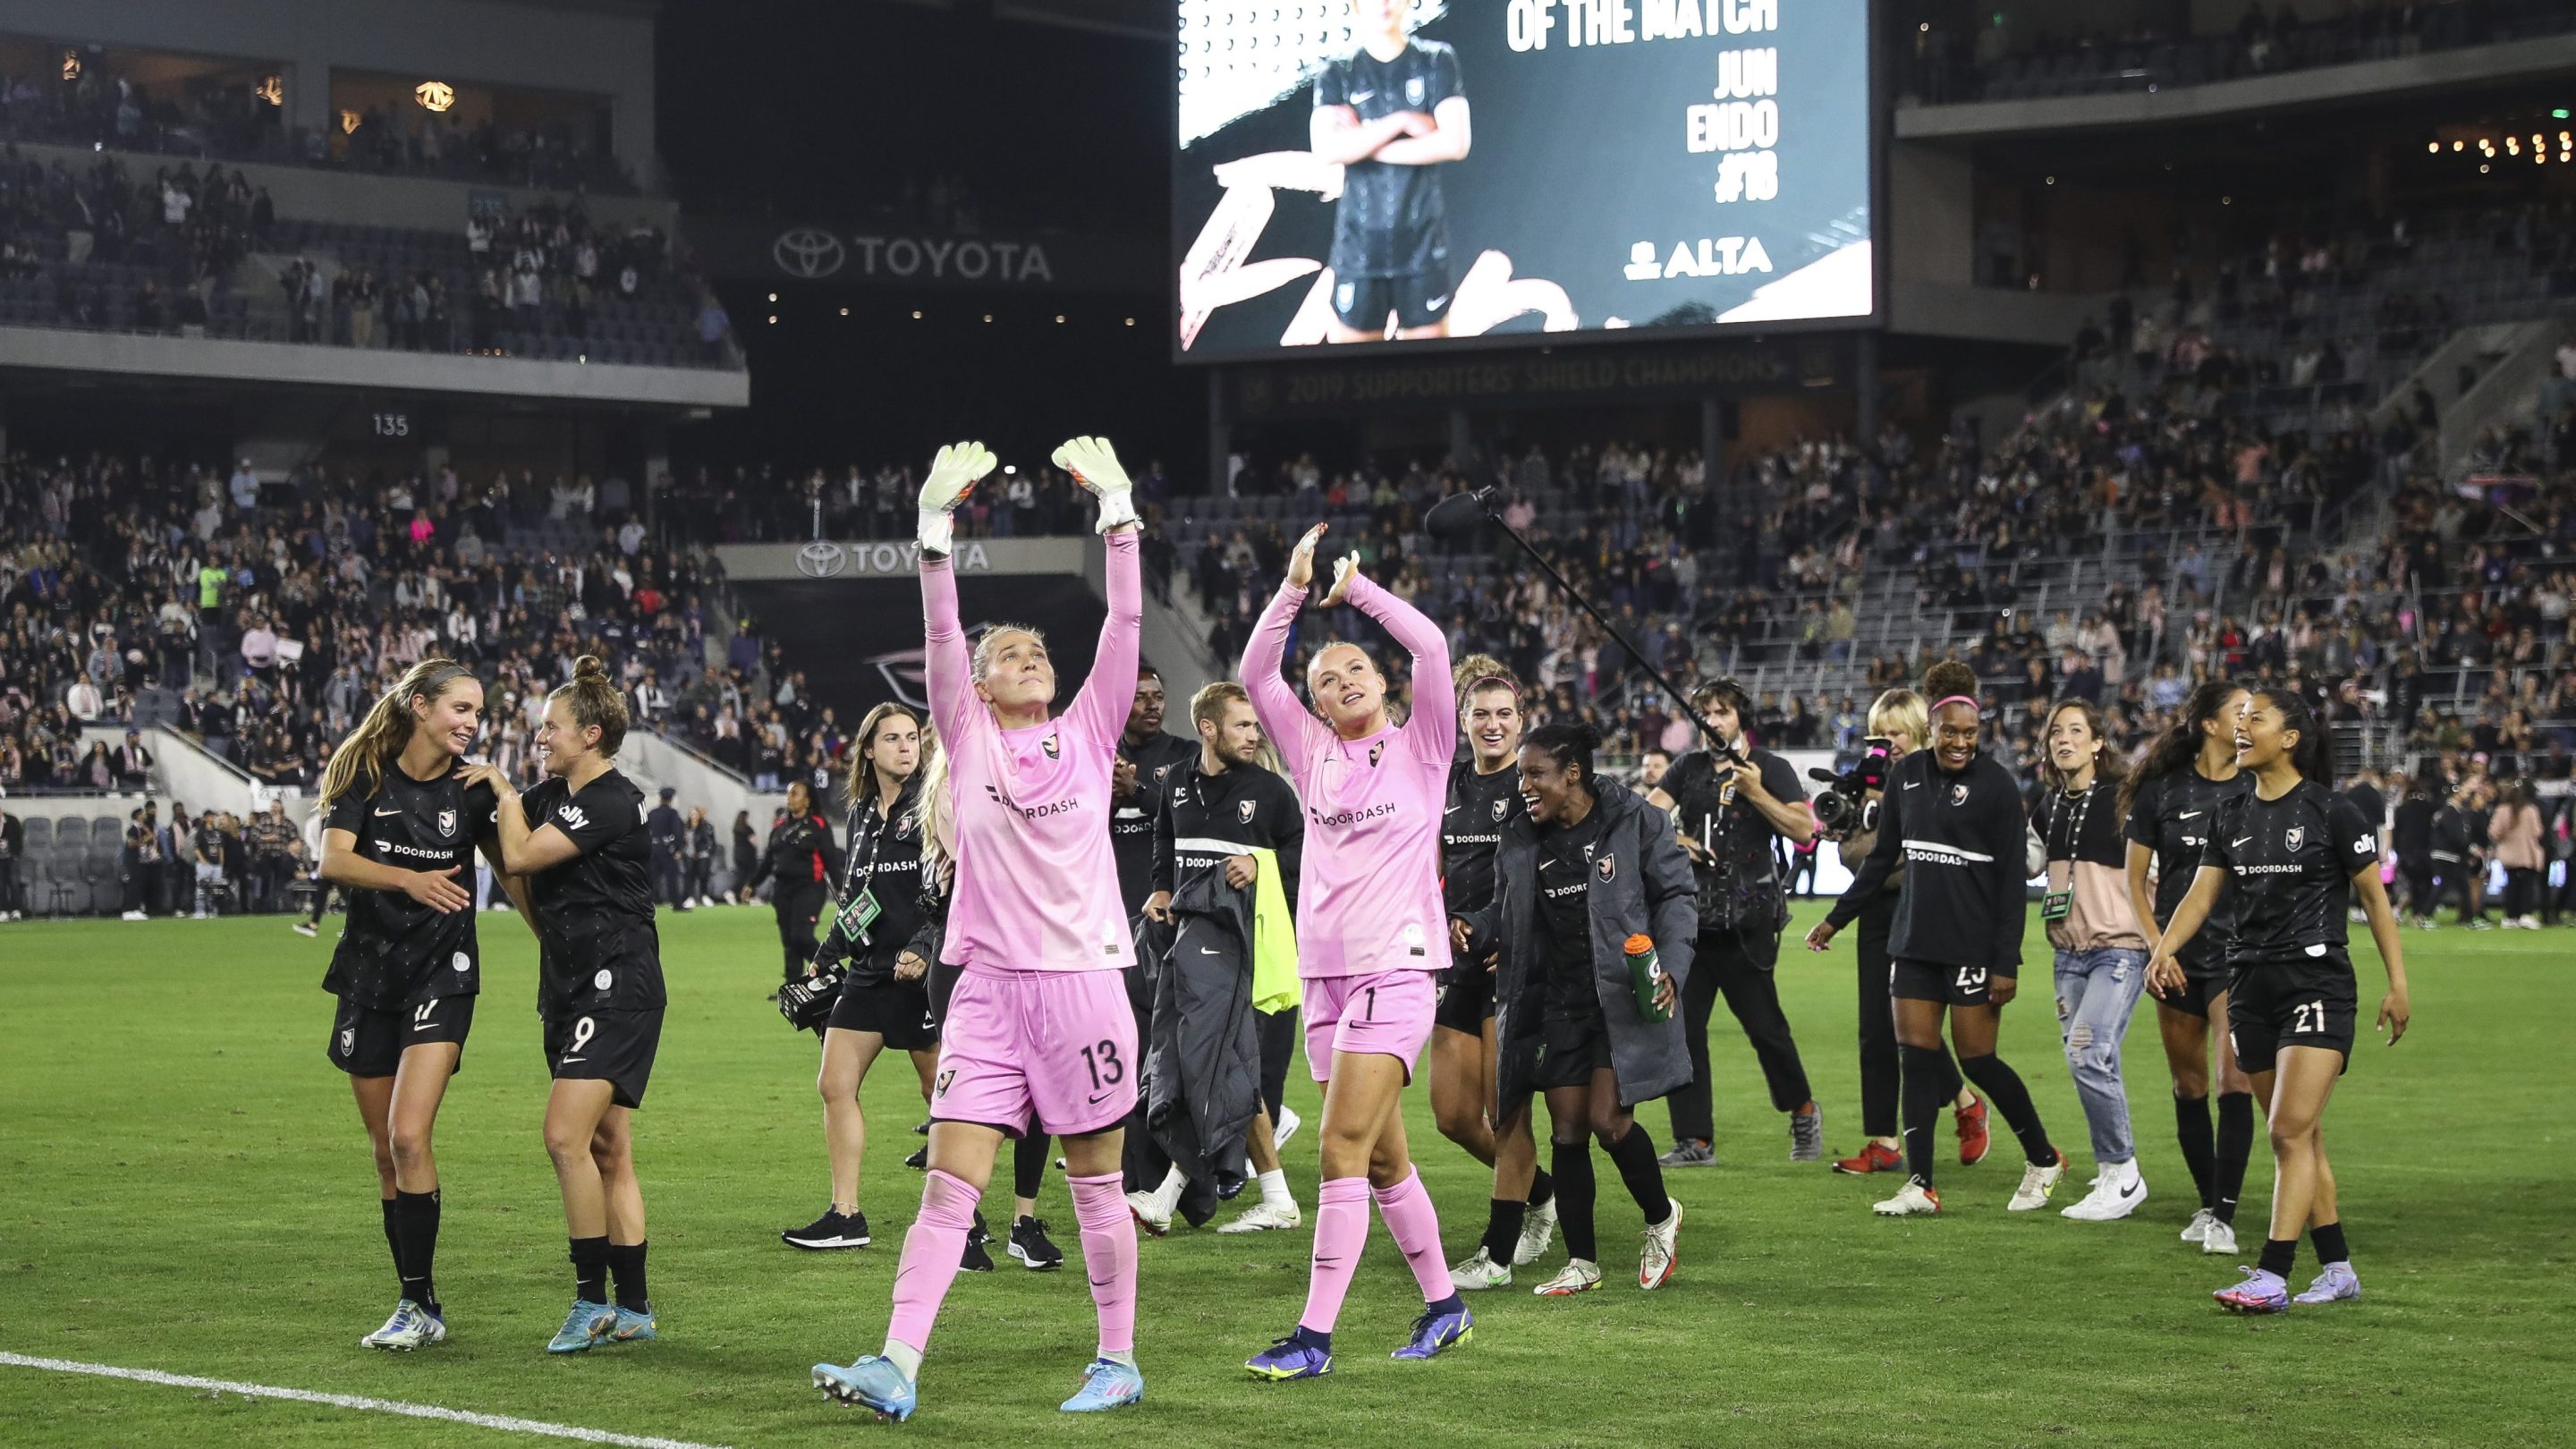 Goalkeepers DiDi Haracic #13 and Brittany Isenhour #1 of Angel City FC wave to fans after defeating North Carolina Courage at Banc of California Stadium on April 29, 2022 in Los Angeles, California.